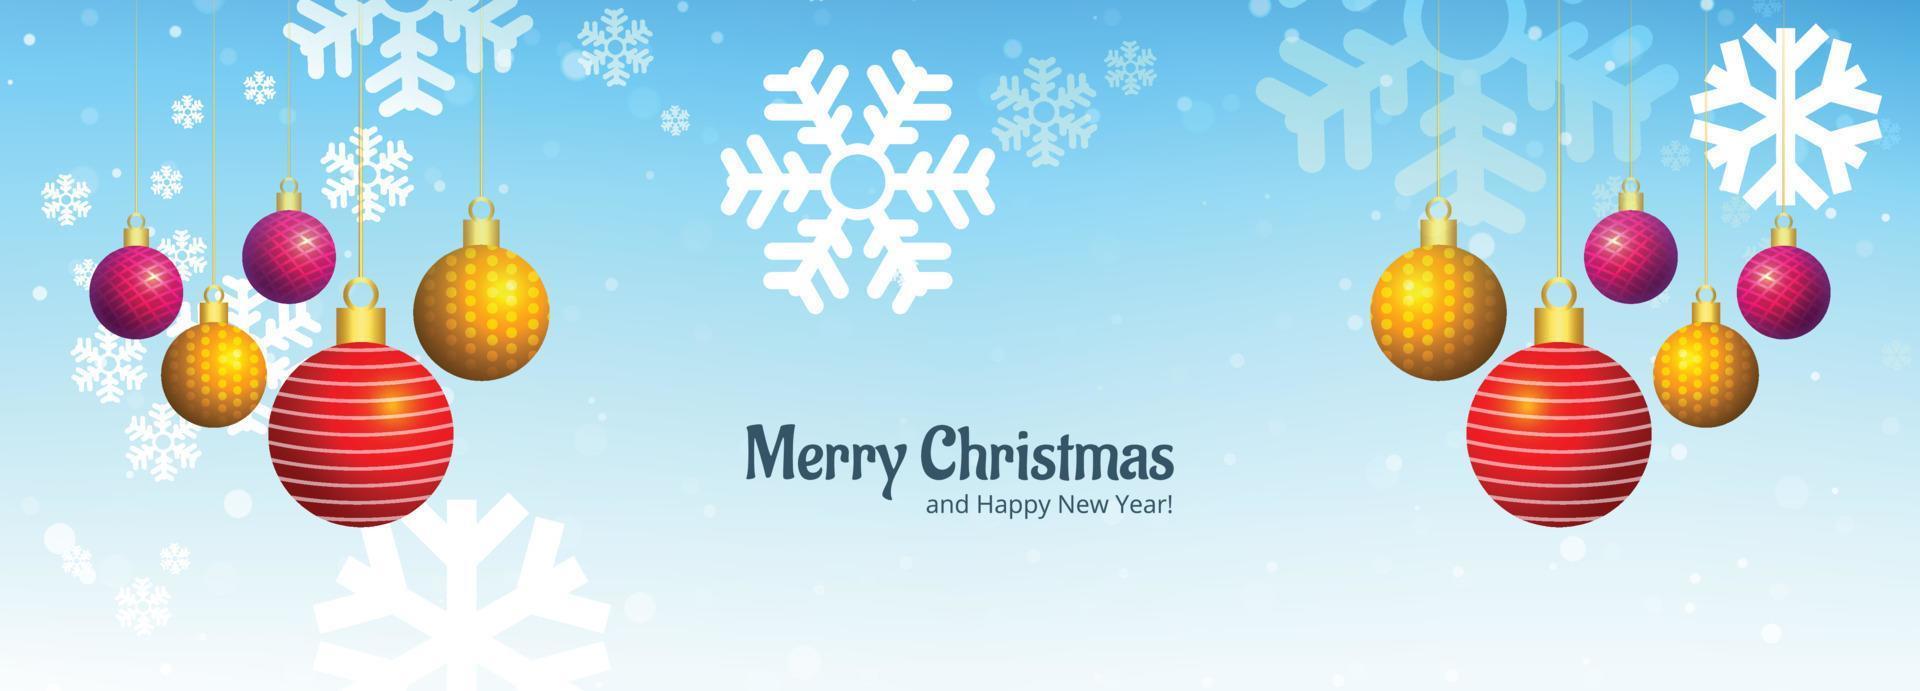 Beautiful christmas holiday card banner background vector